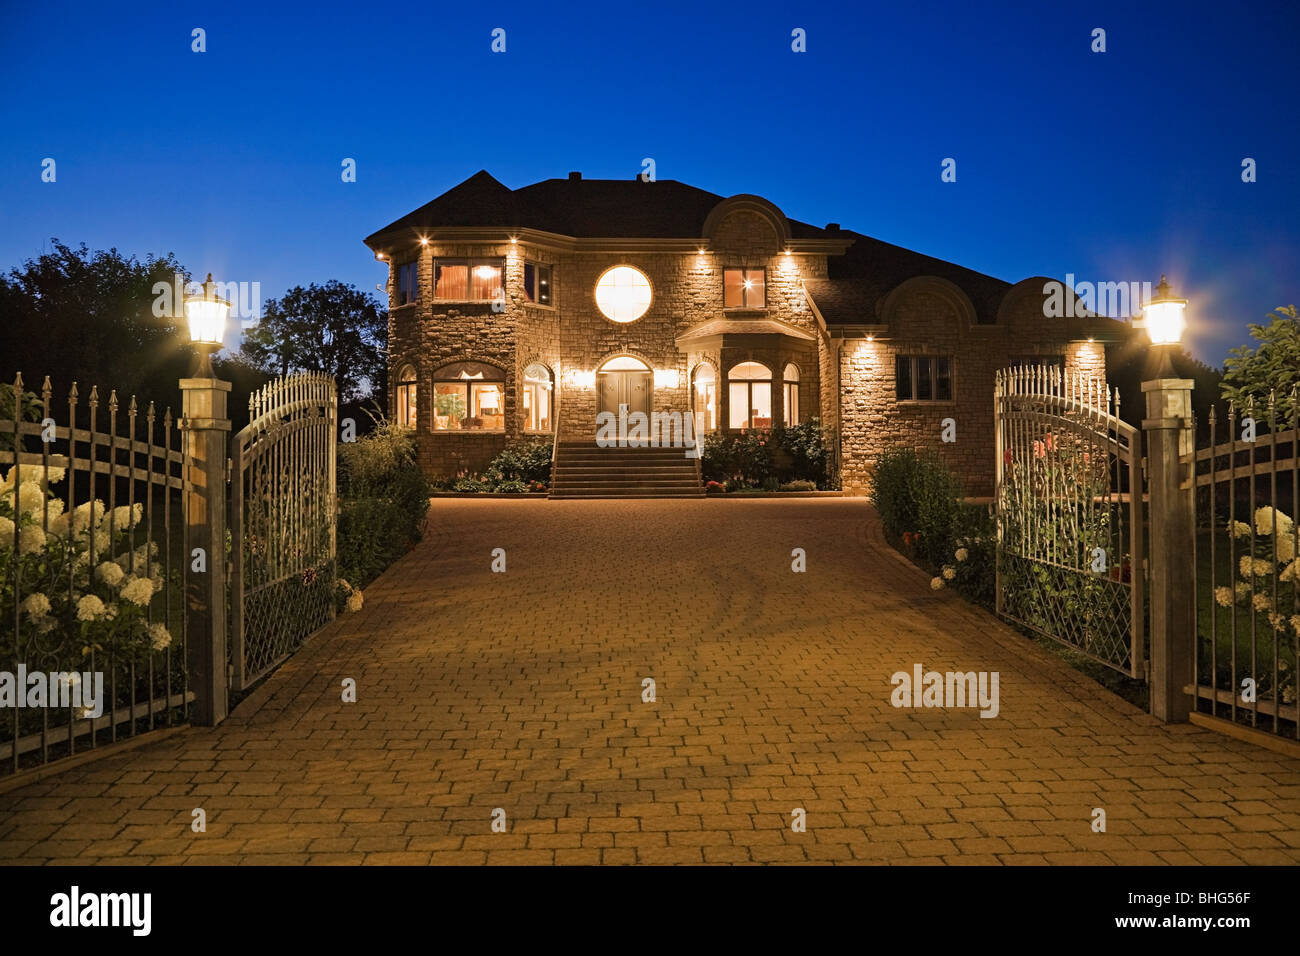 Large house with driveway Stock Photo